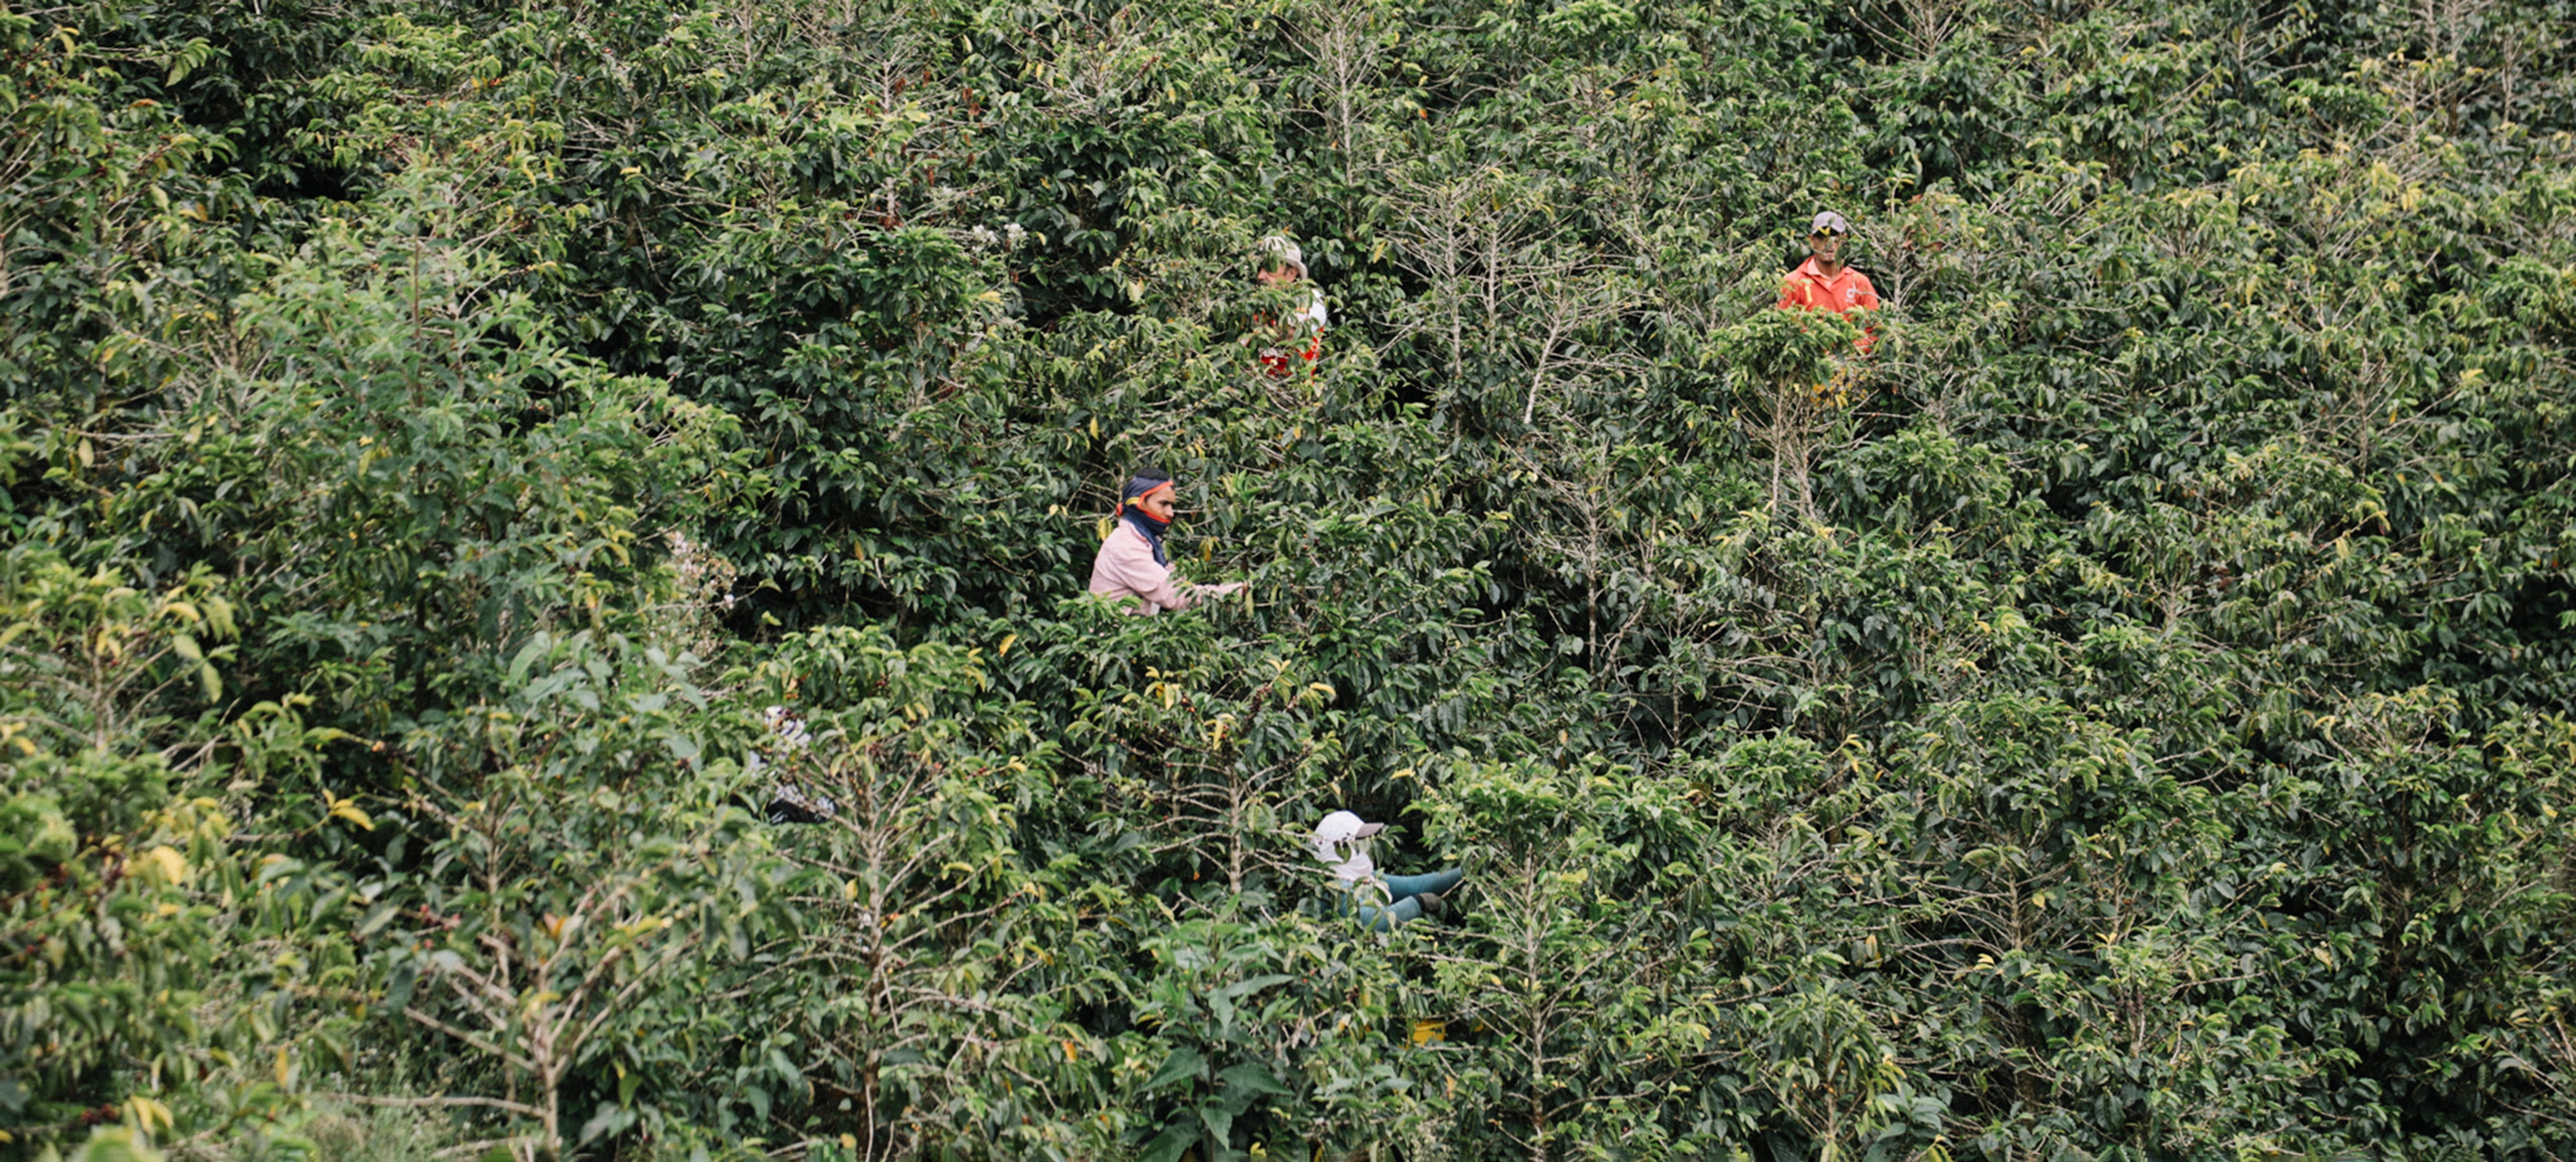 Farmers in the field picking coffee